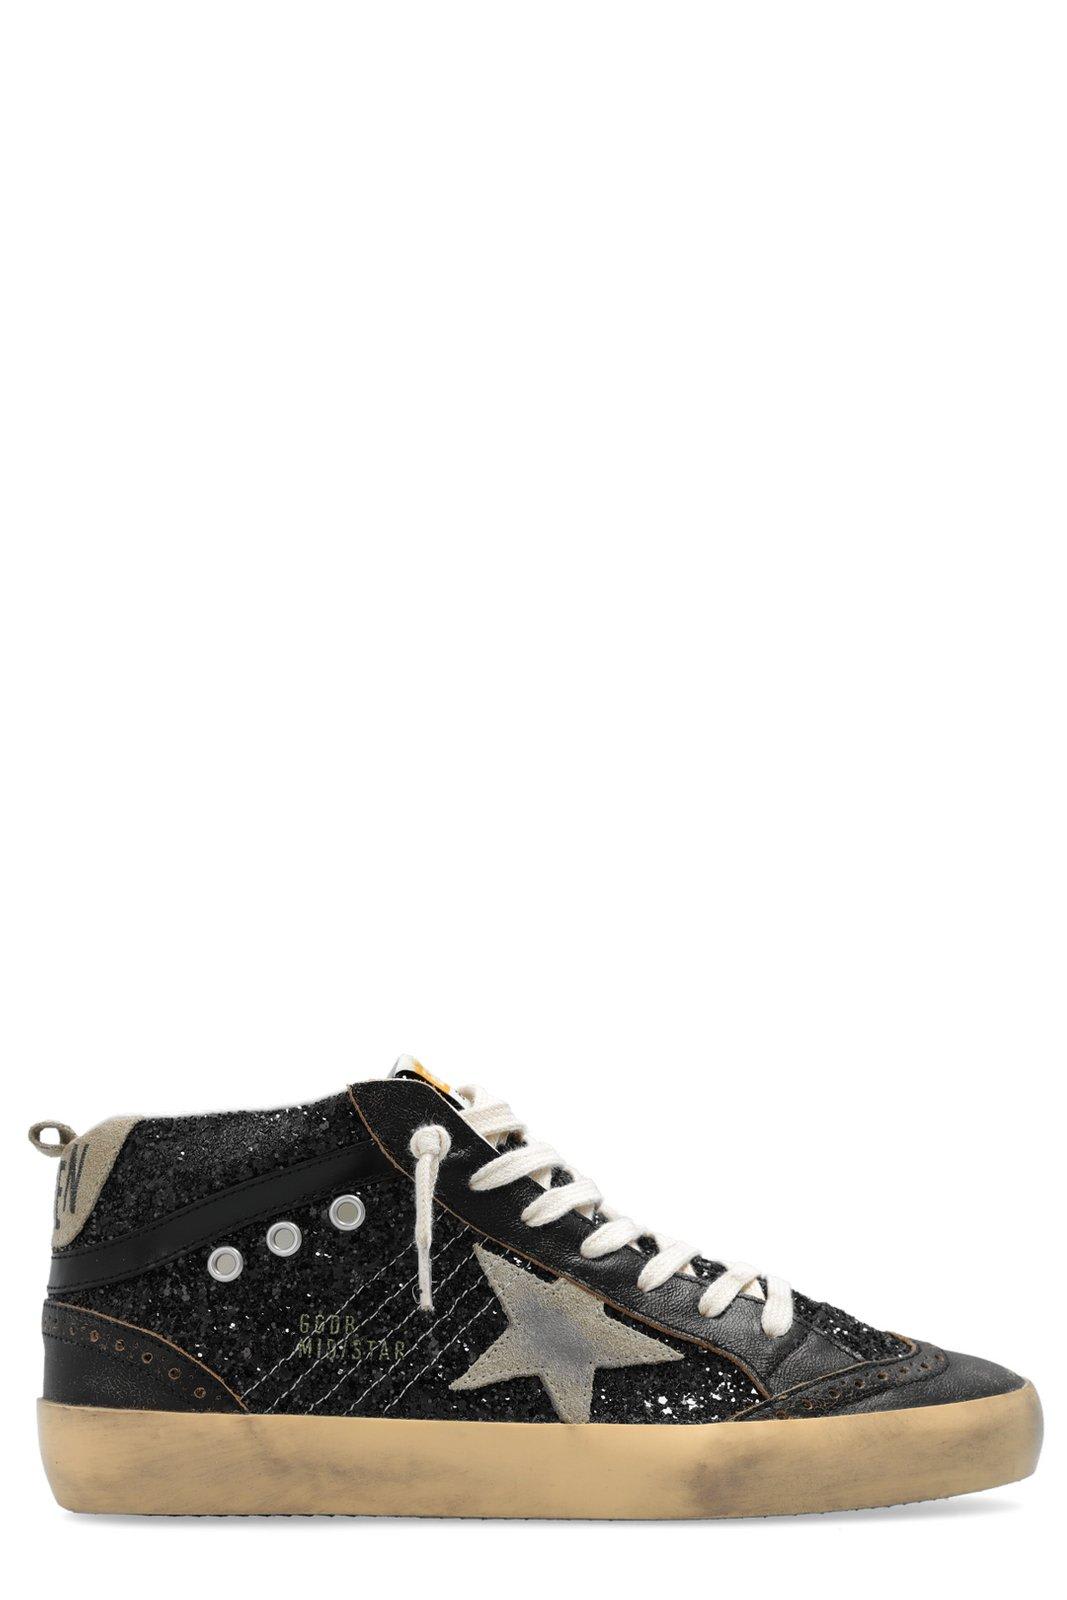 GOLDEN GOOSE GG MID STAR SEQUINNED LACE-UP SNEAKERS